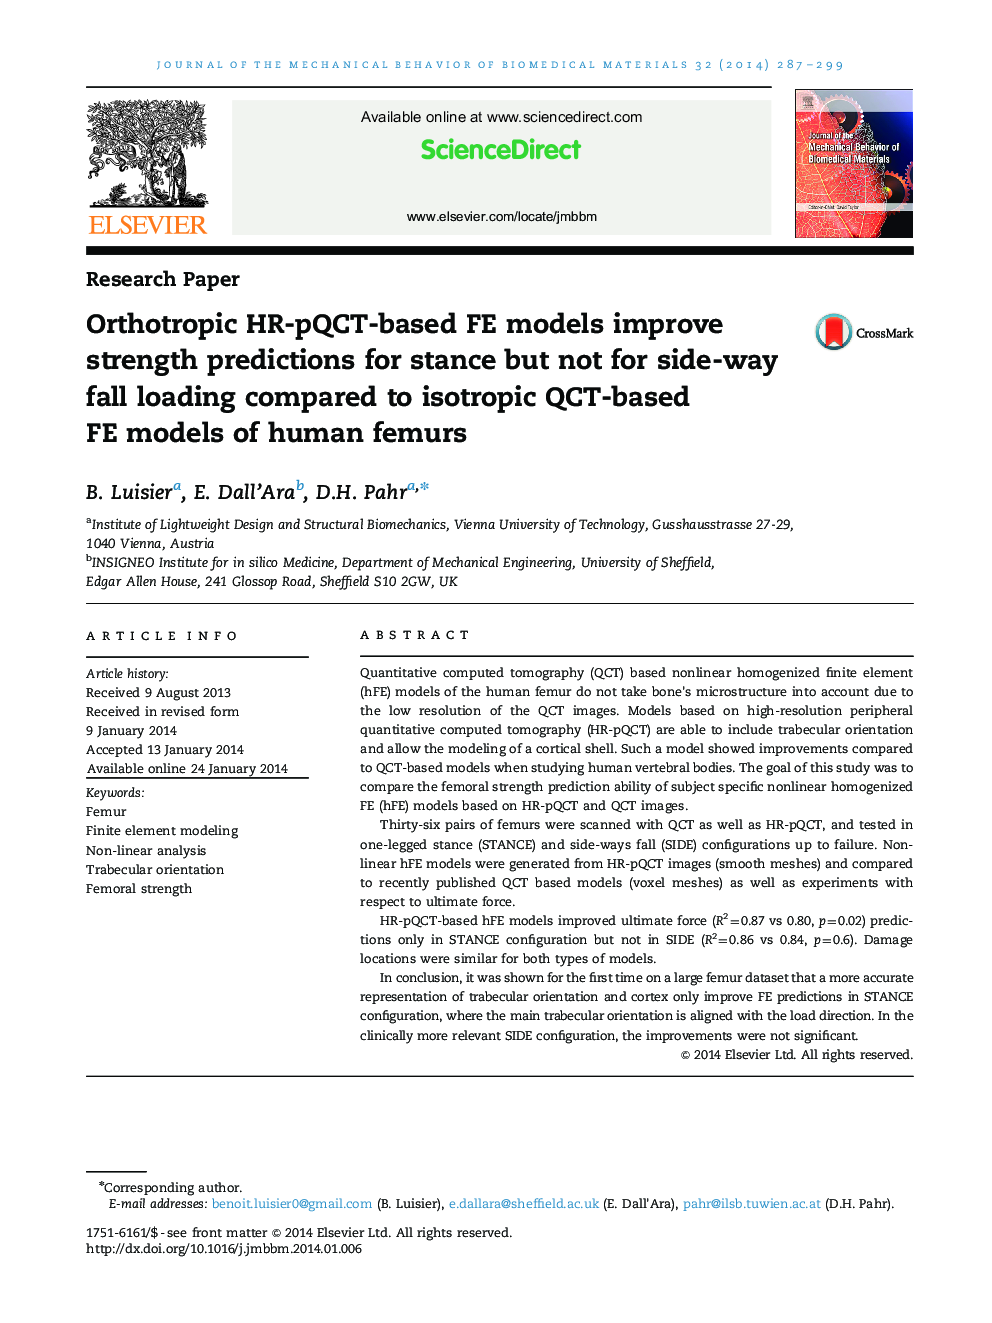 Orthotropic HR-pQCT-based FE models improve strength predictions for stance but not for side-way fall loading compared to isotropic QCT-based FE models of human femurs